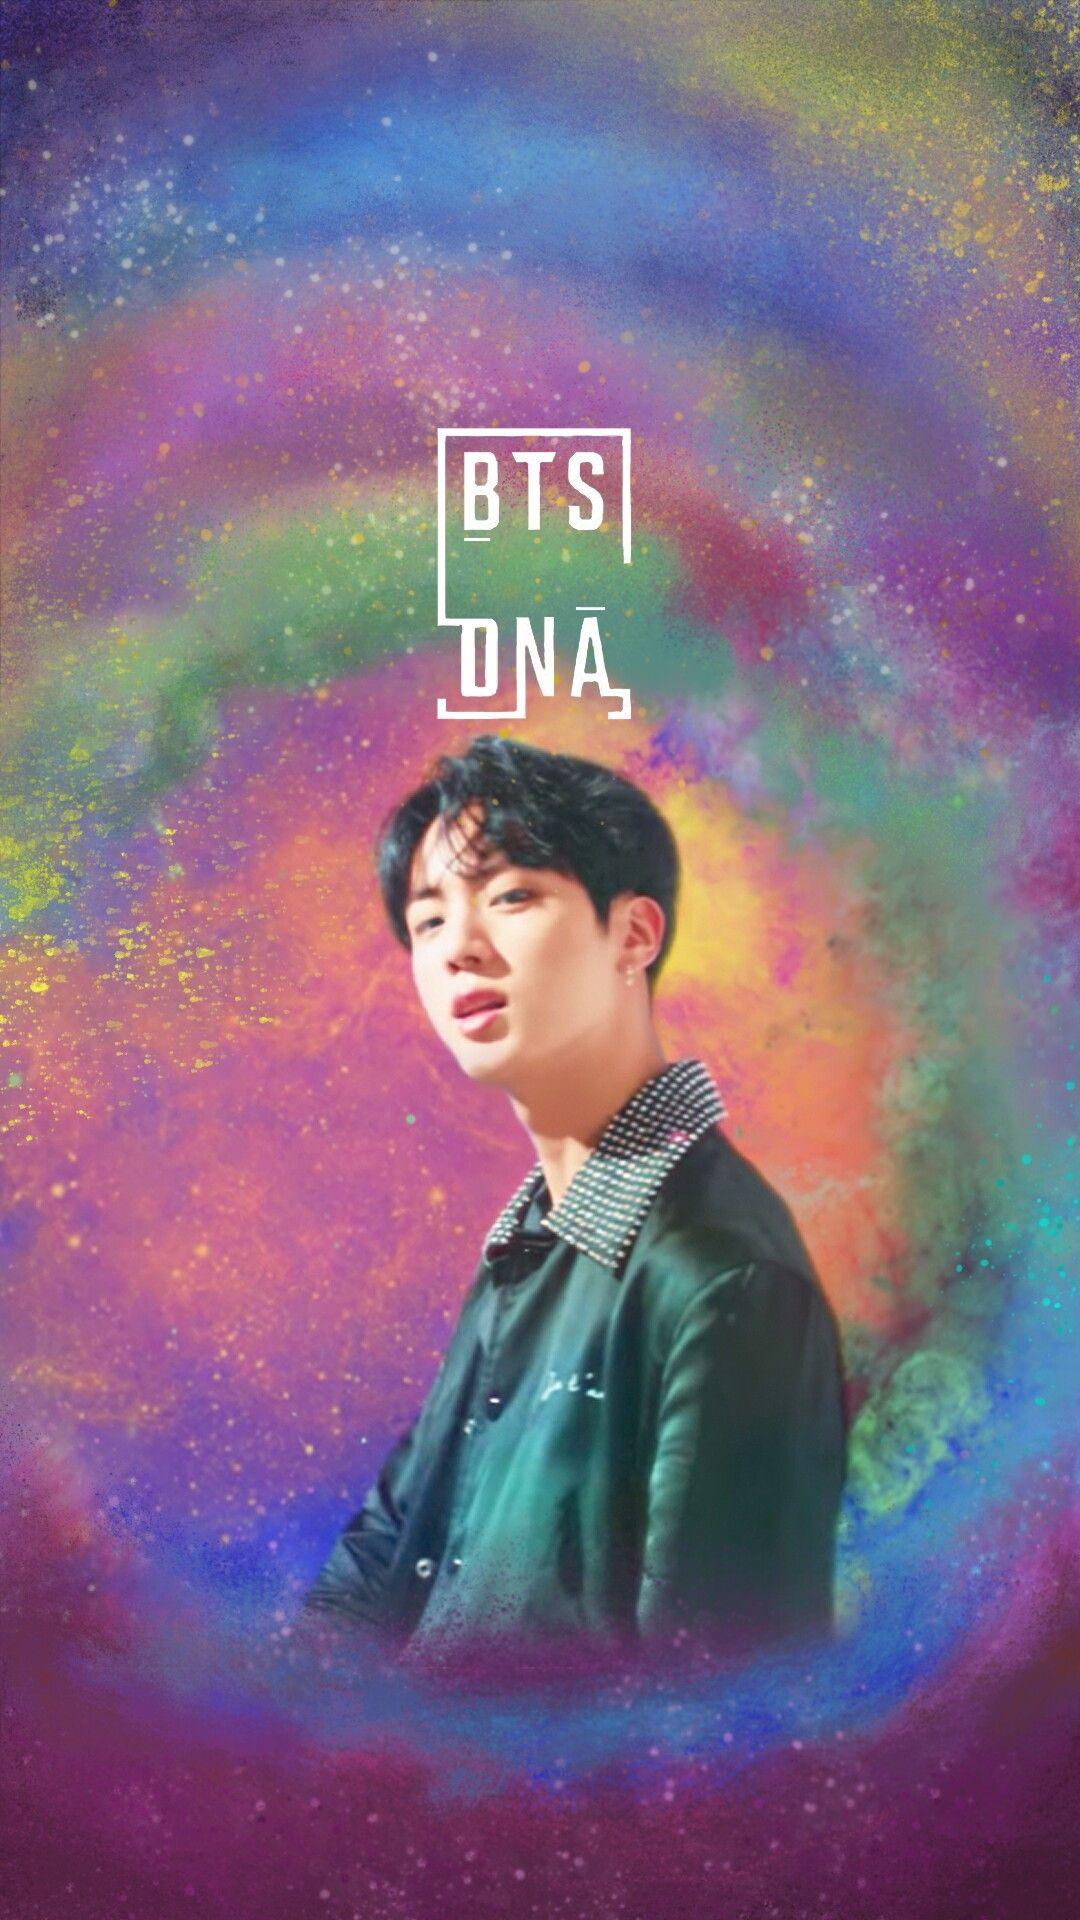 Jin Bts Wallpaper Jin Bts Wallpapers Wallpaper Cave Tons Of